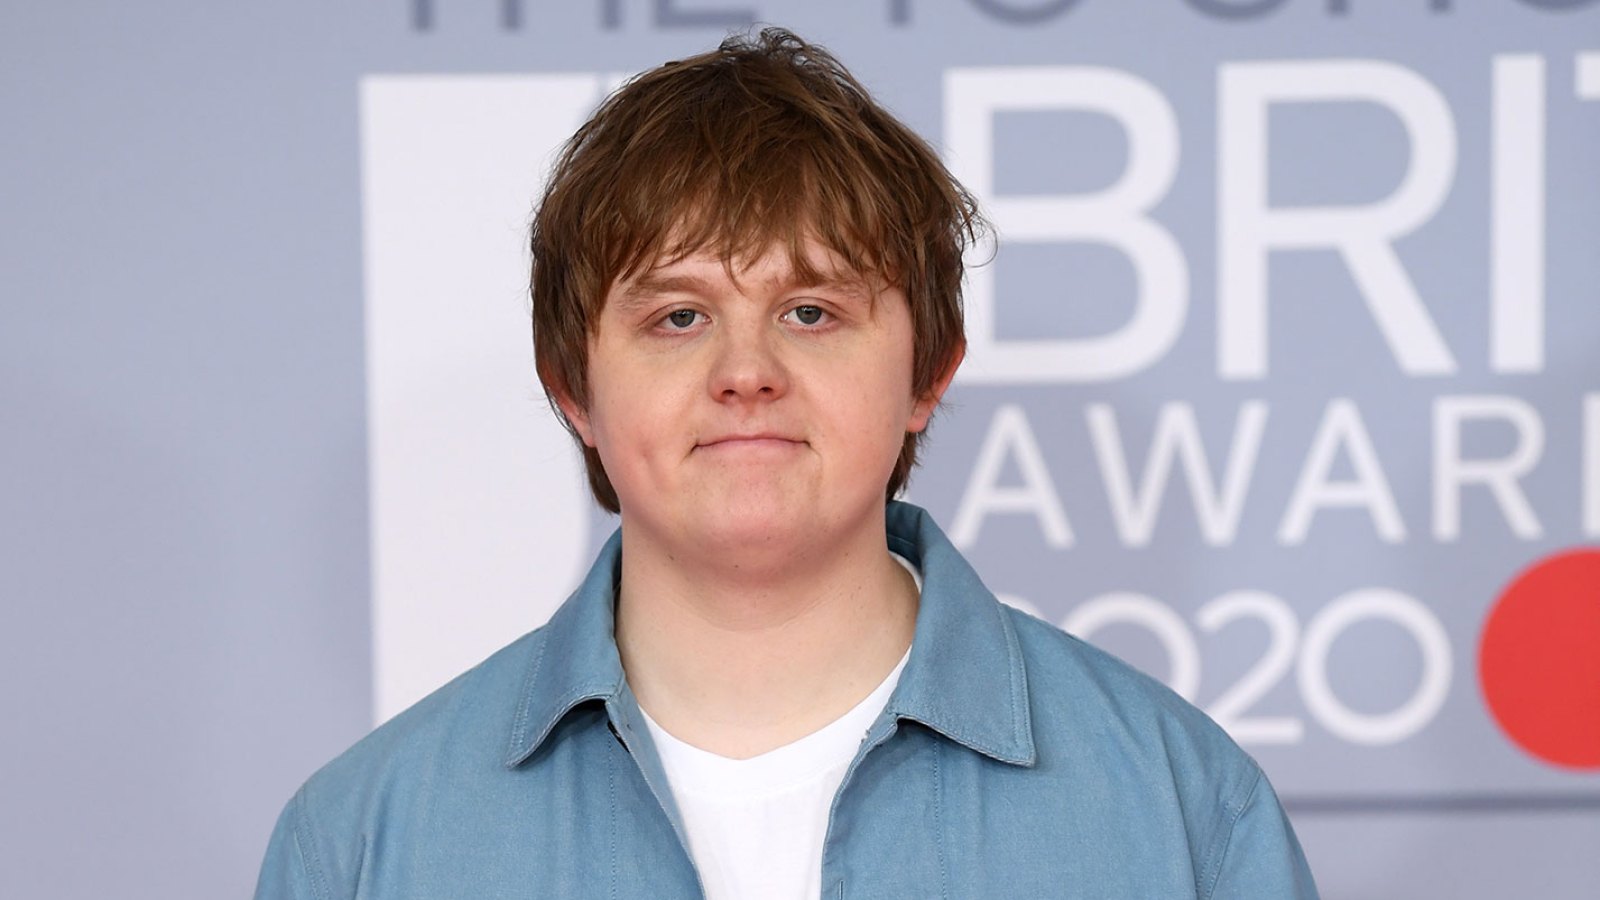 Singer Lewis Capaldi Has Been Diagnosed With Tourette's Syndrome